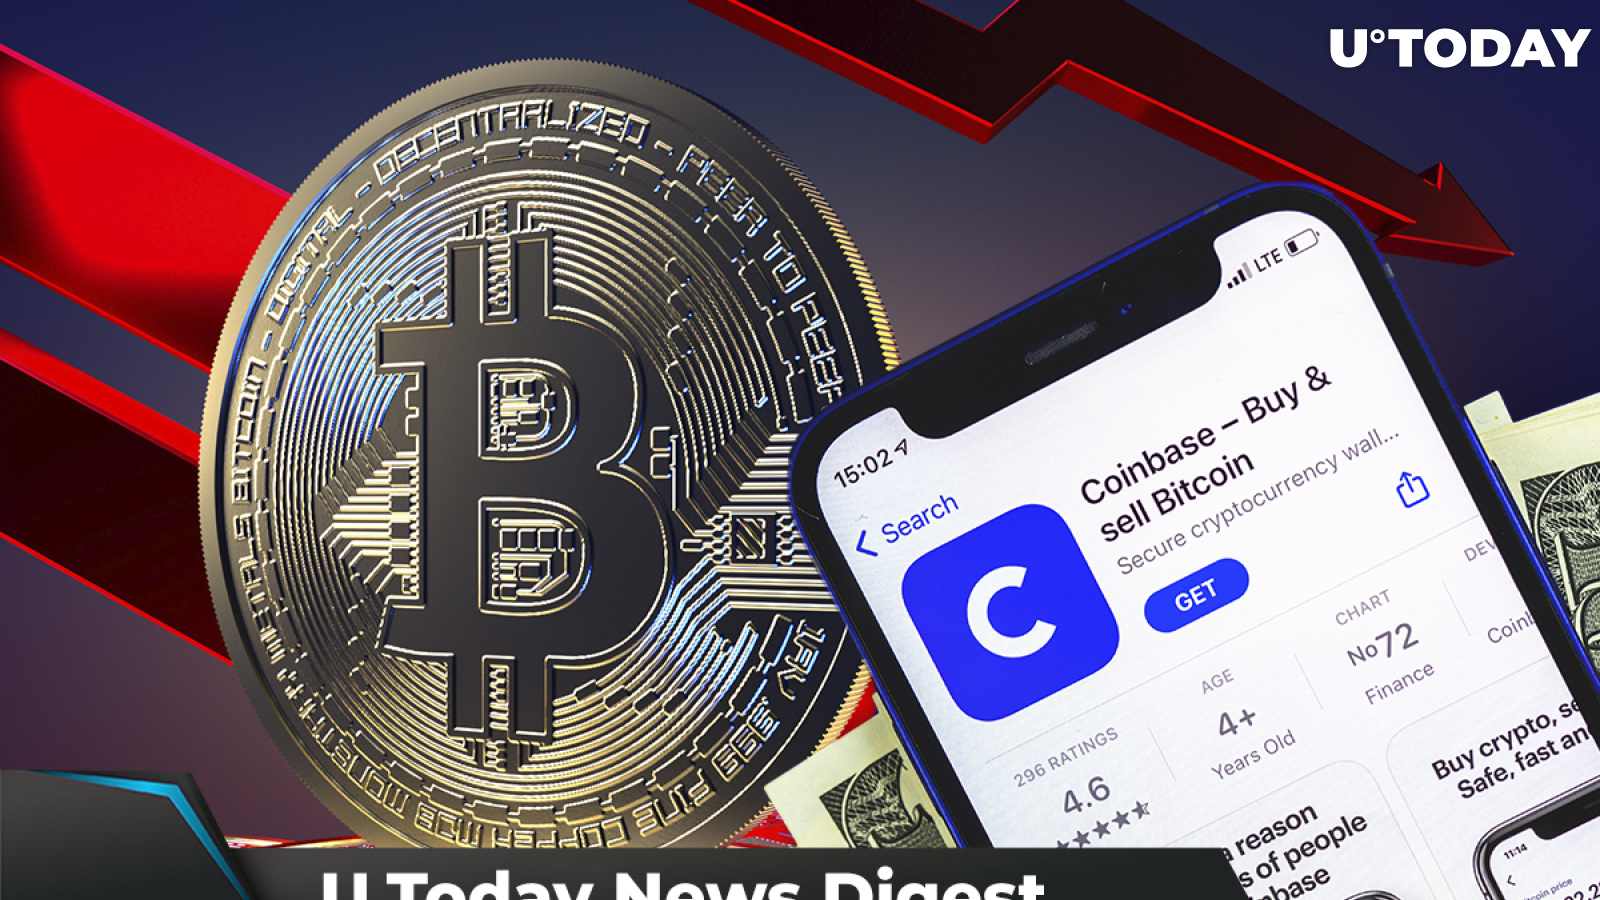 Bitcoin Plunges 7%, DOGE Gets Ahead of SHIB, Coinbase Becomes Most Popular iPhone App: Crypto News Digest by U.Today